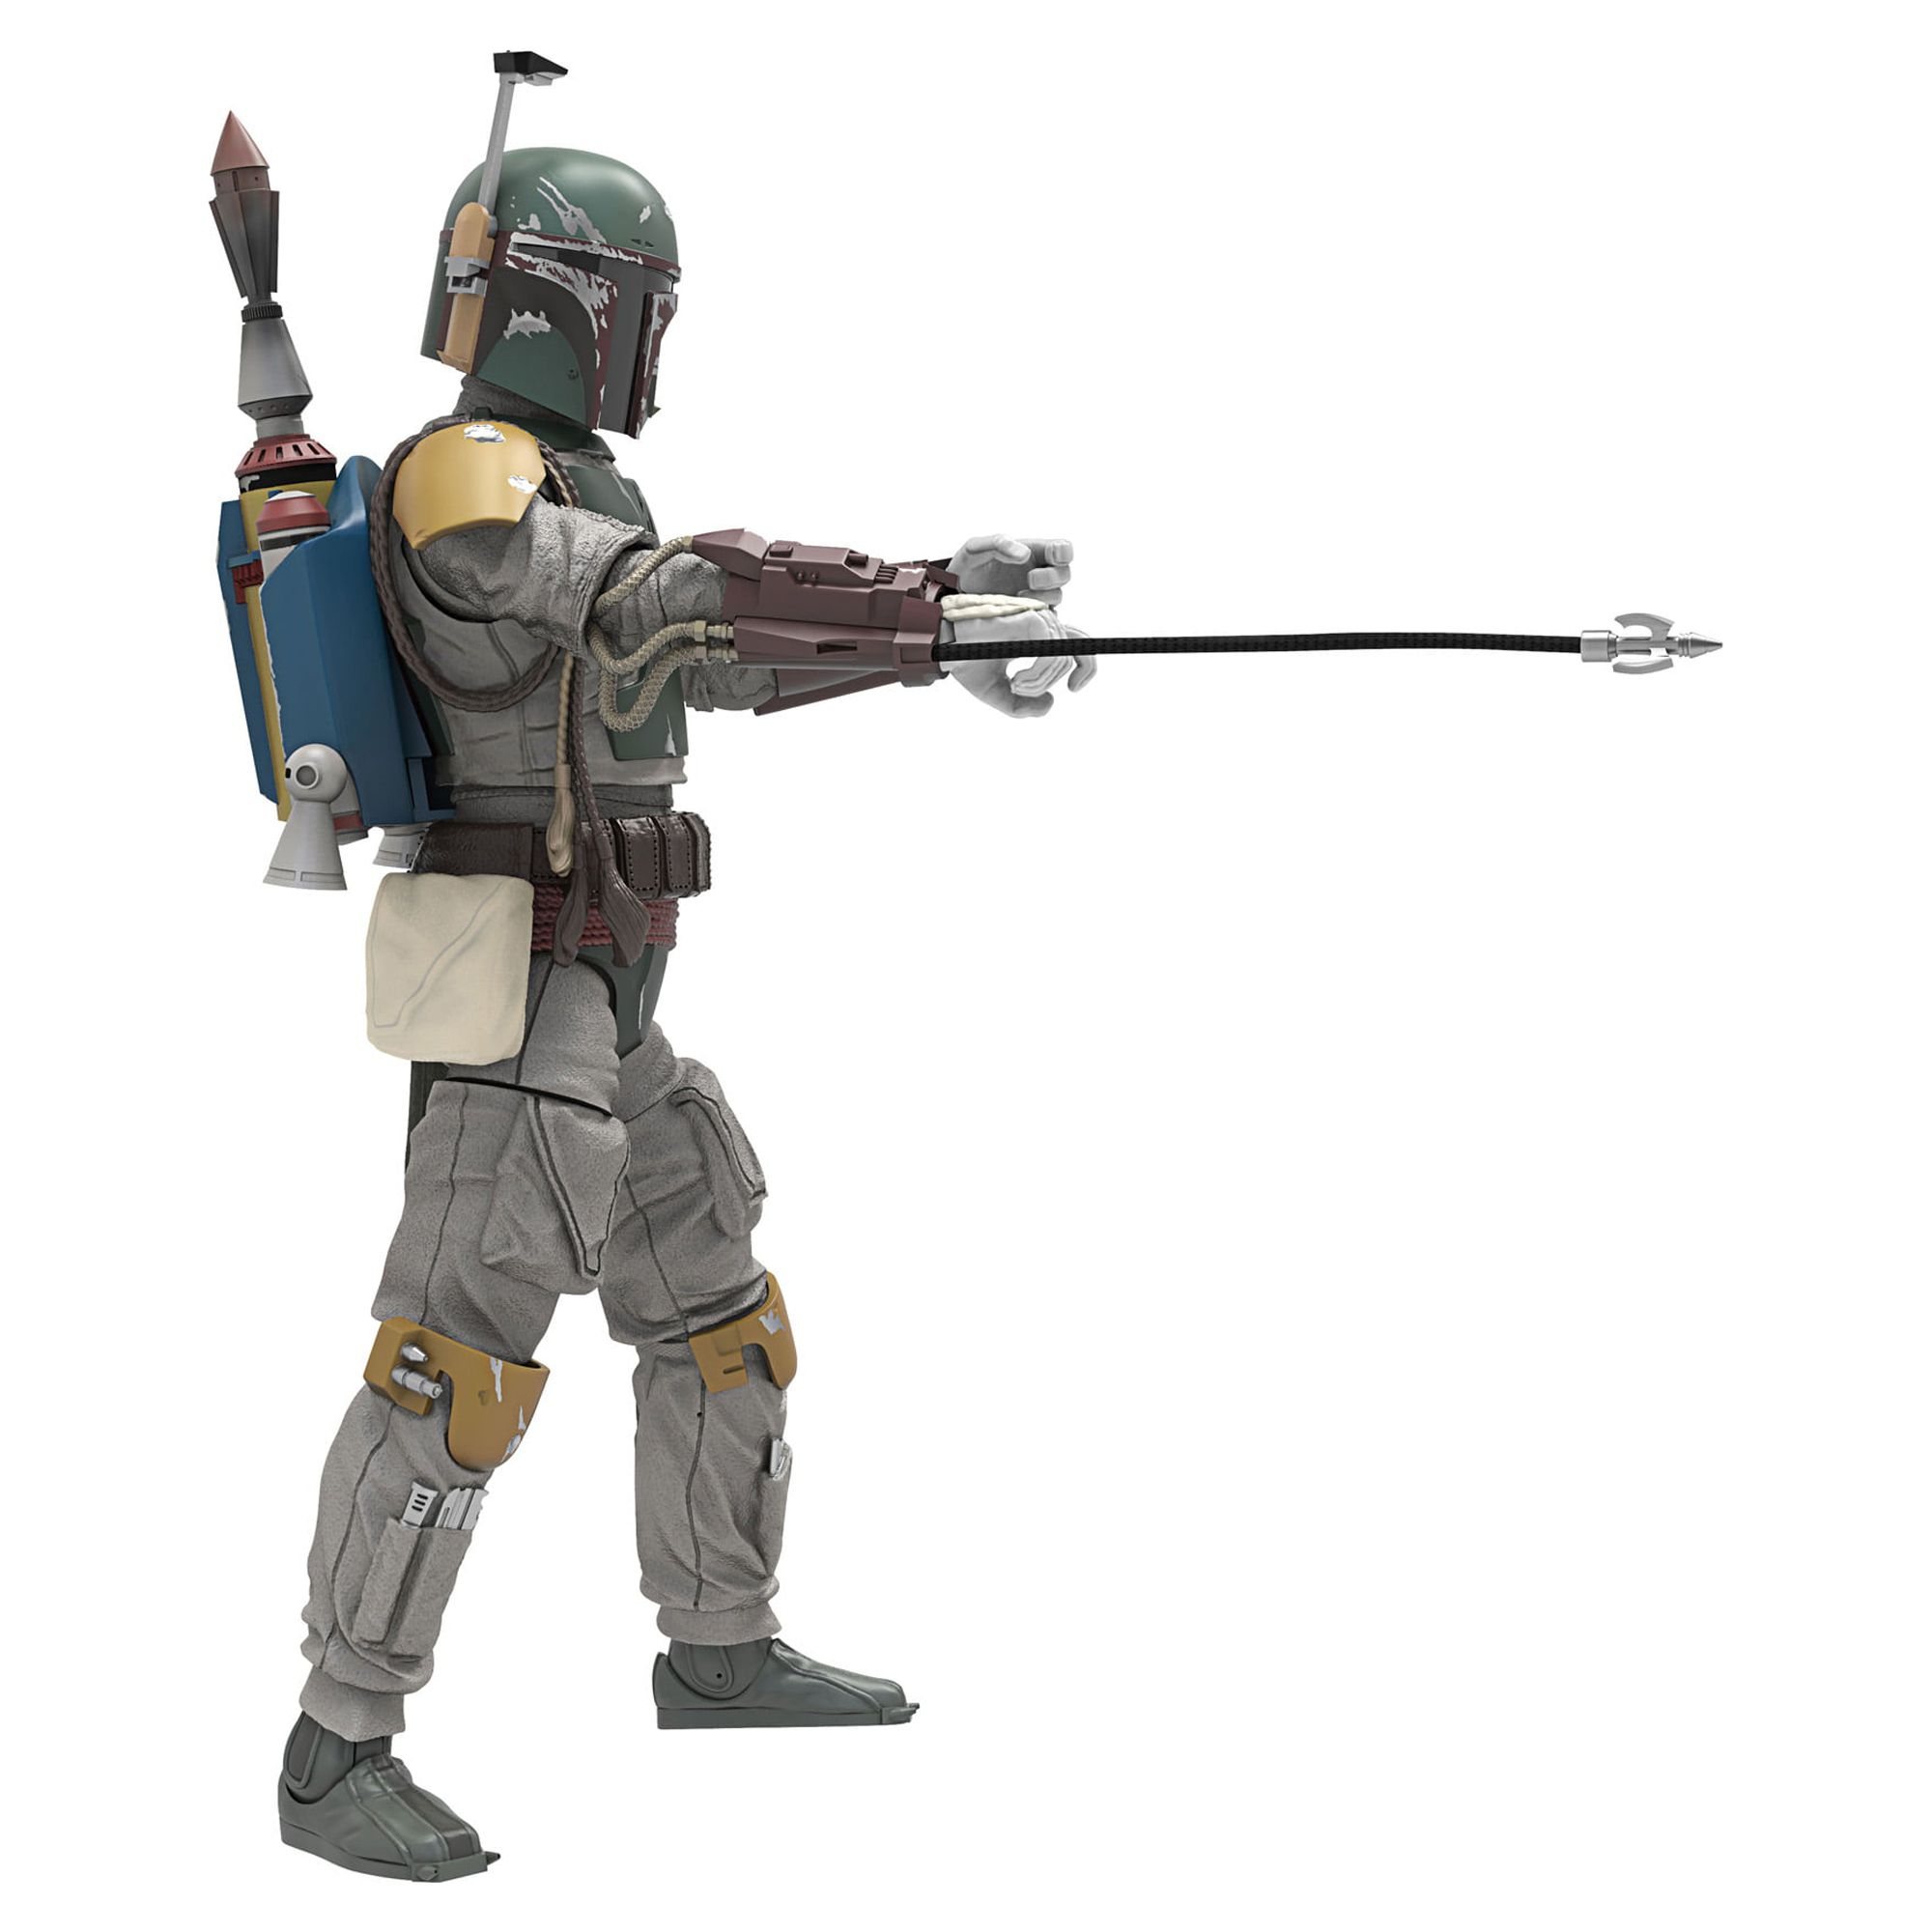 Star Wars Return of the Jedi: The Black Series Boba Fett Kids Toy Action Figure for Boys and Girls (3”) - image 4 of 11